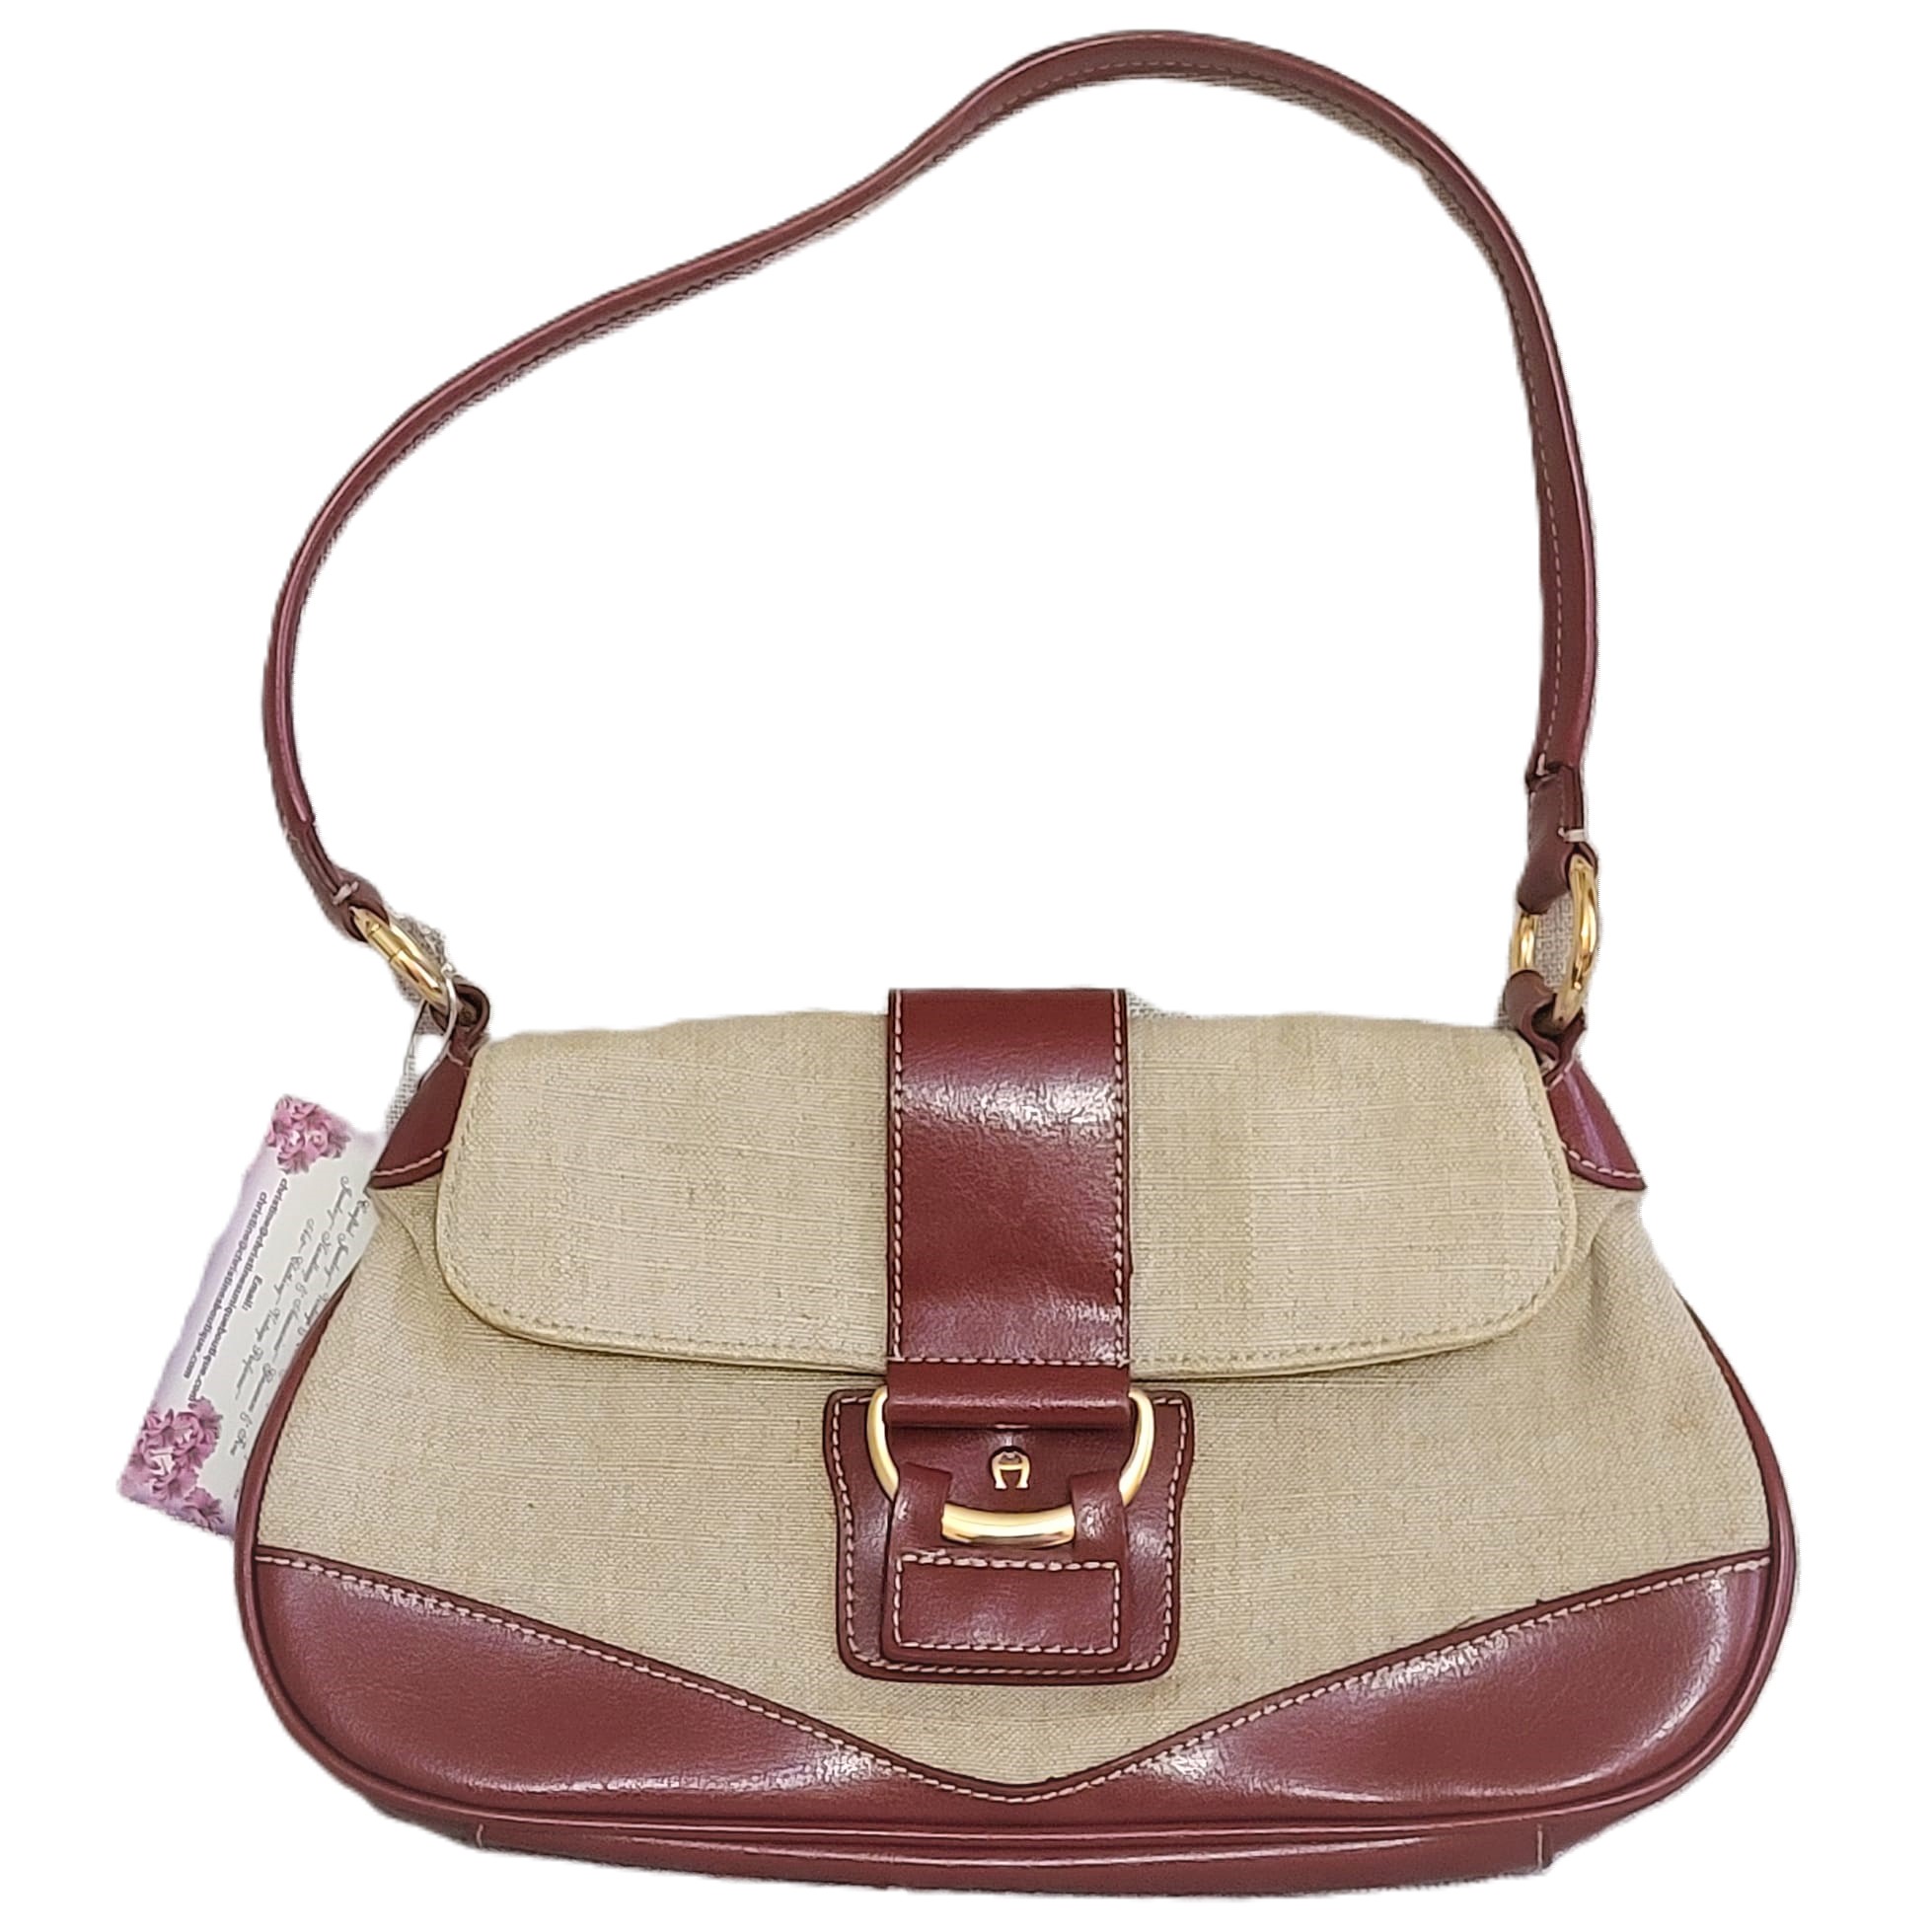 Etienne Aigner Canvas with Red Trim Handbag - Click Image to Close